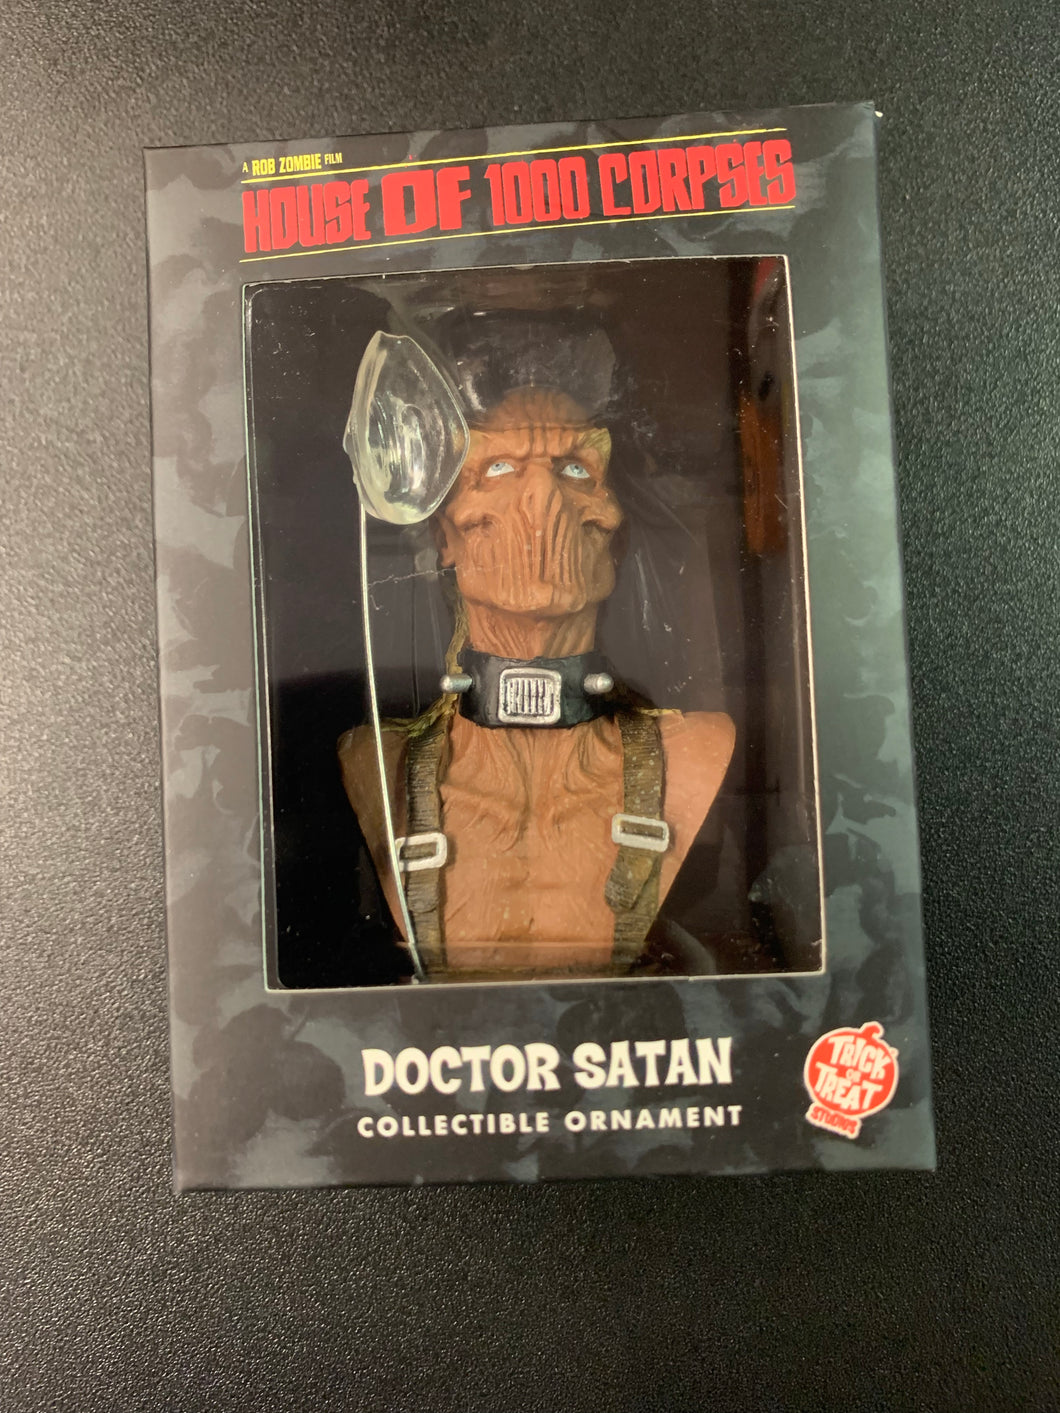 HOLIDAY HORRORS - HOUSE OF 1,000 CORPSES DOCTOR SATAN ORNAMENT